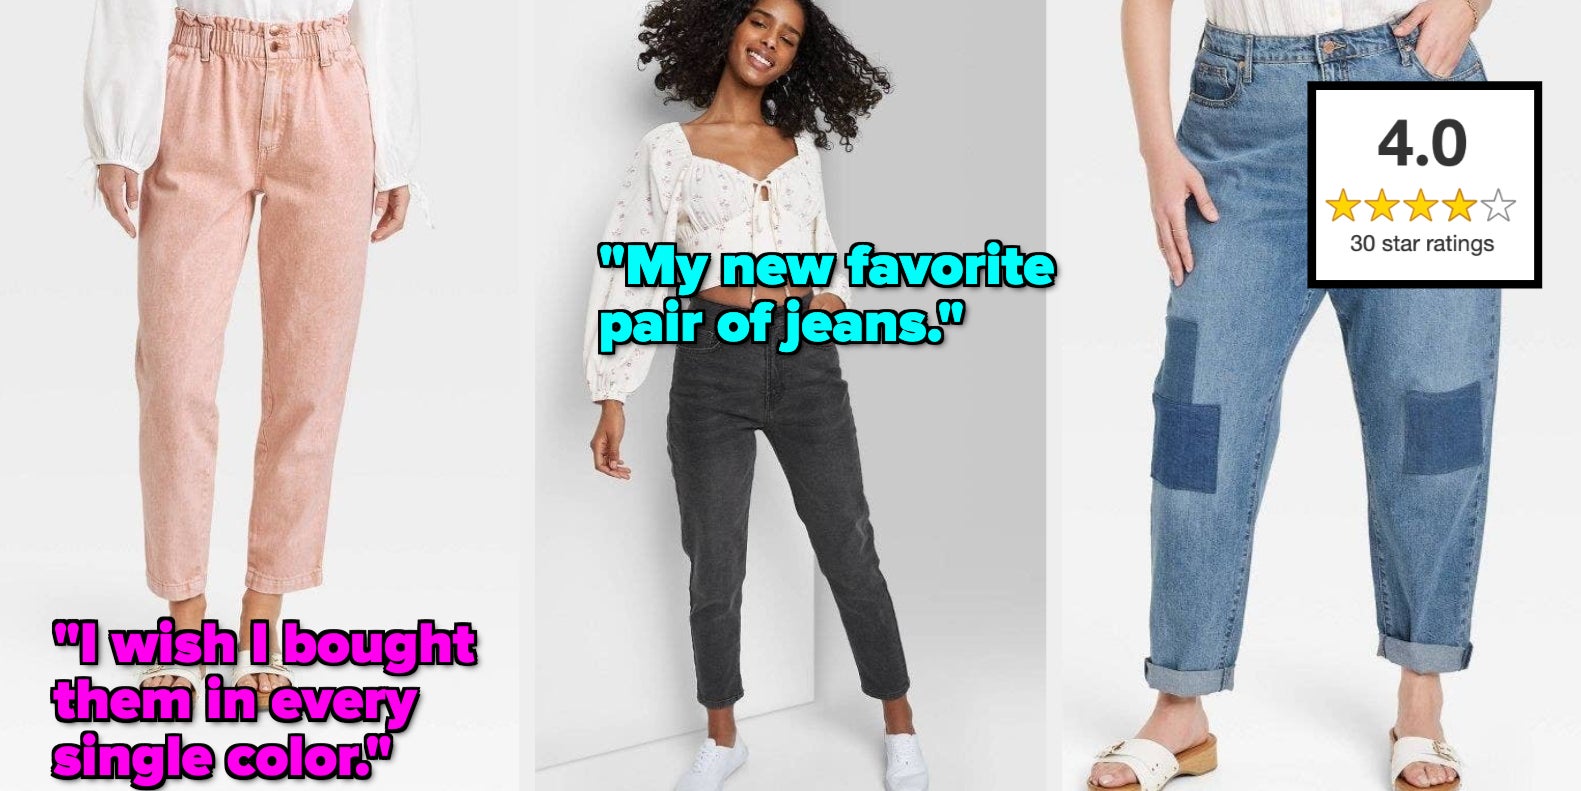 Shoppers Can't Stop Buying These $25 Jeans That 'Fit Like a